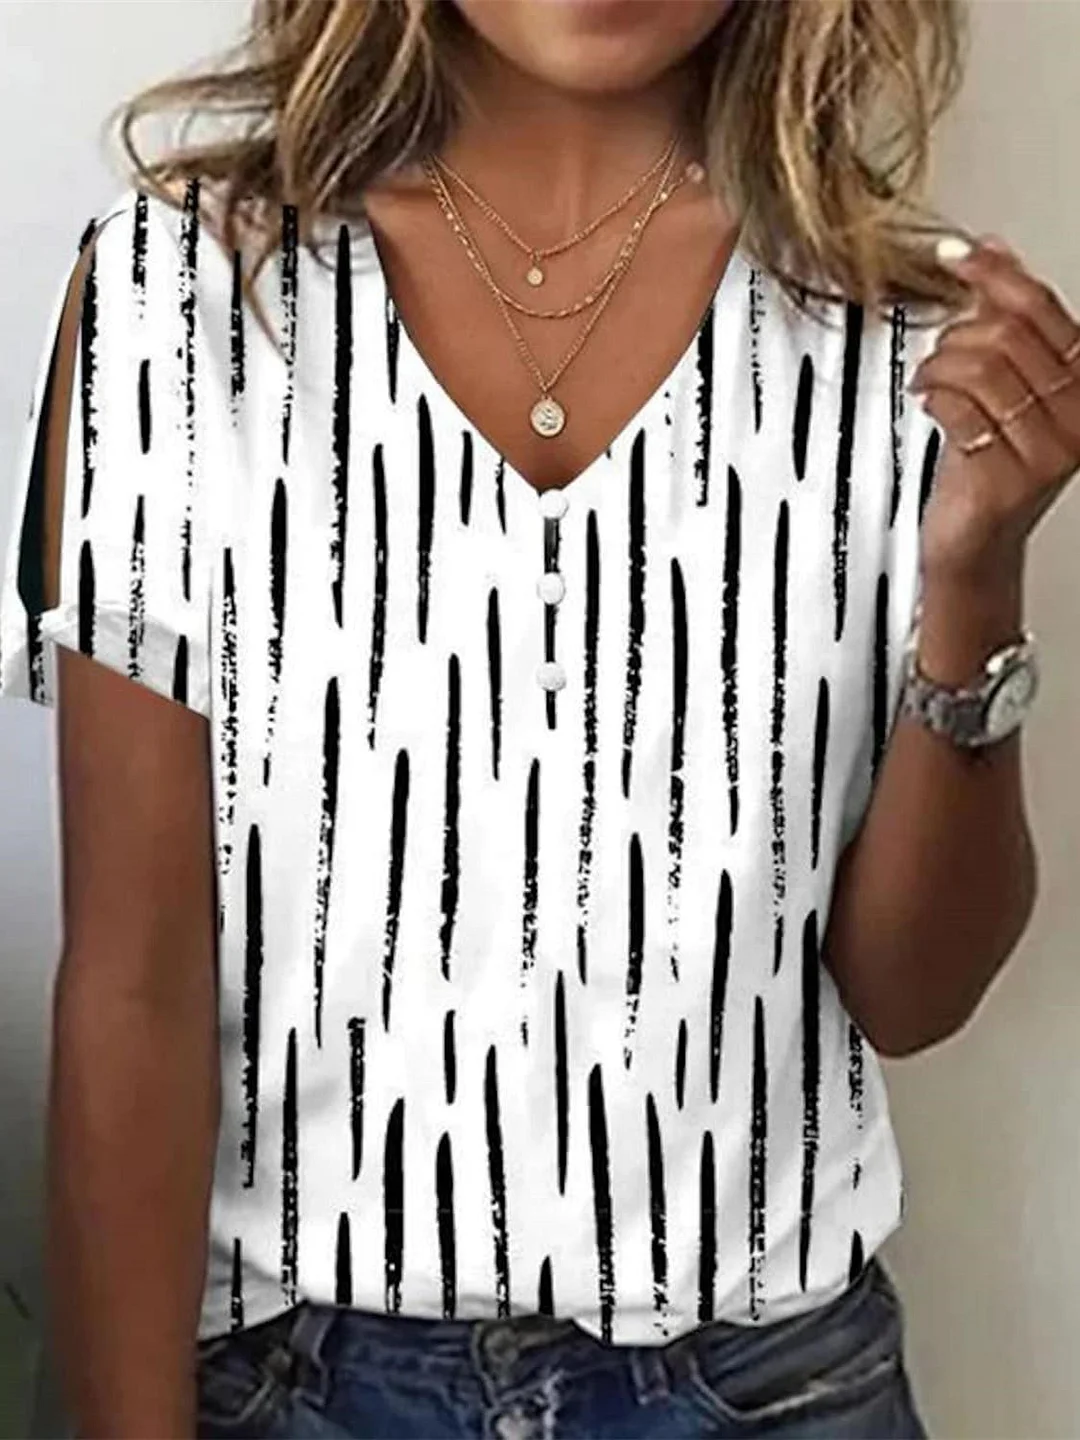 Women's Graphic Printed Short Sleeve V-neck Top